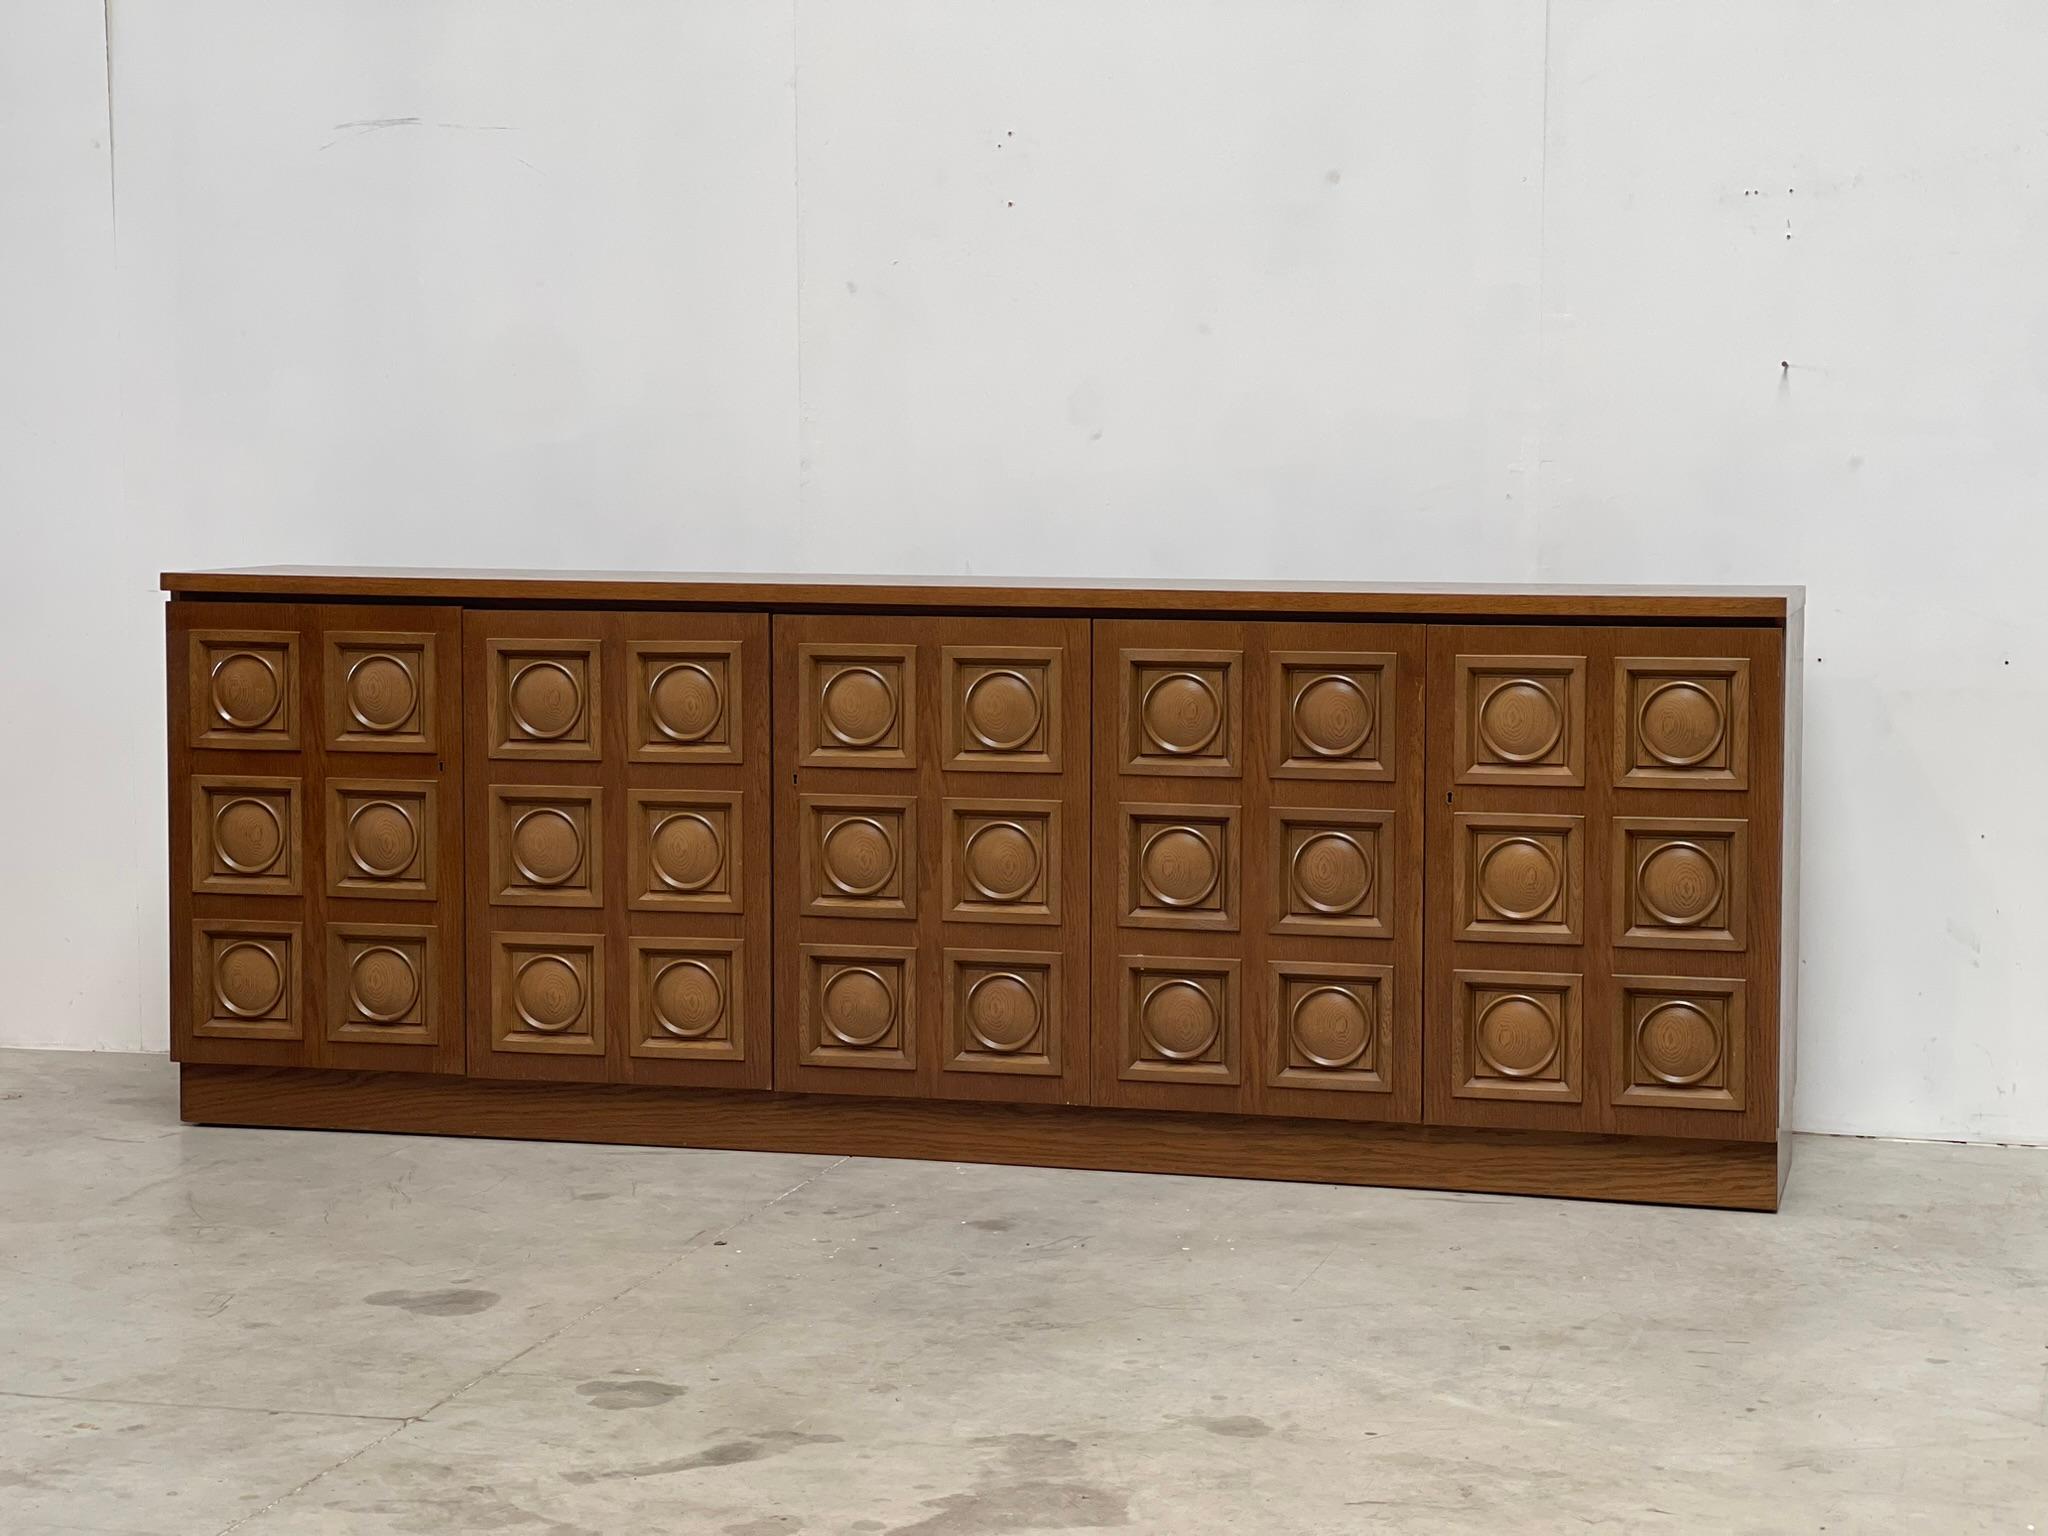 Brown brutalist credenza with 5 graphical doors and 2 central drawers.

Beautiful timeless design and a real eye catcher for your living room.

Good condition.

1970s - Belgium

Dimensions:

Lenght: 250cm
Height: 90cm
Depth: 45cm

Ref.: 206541